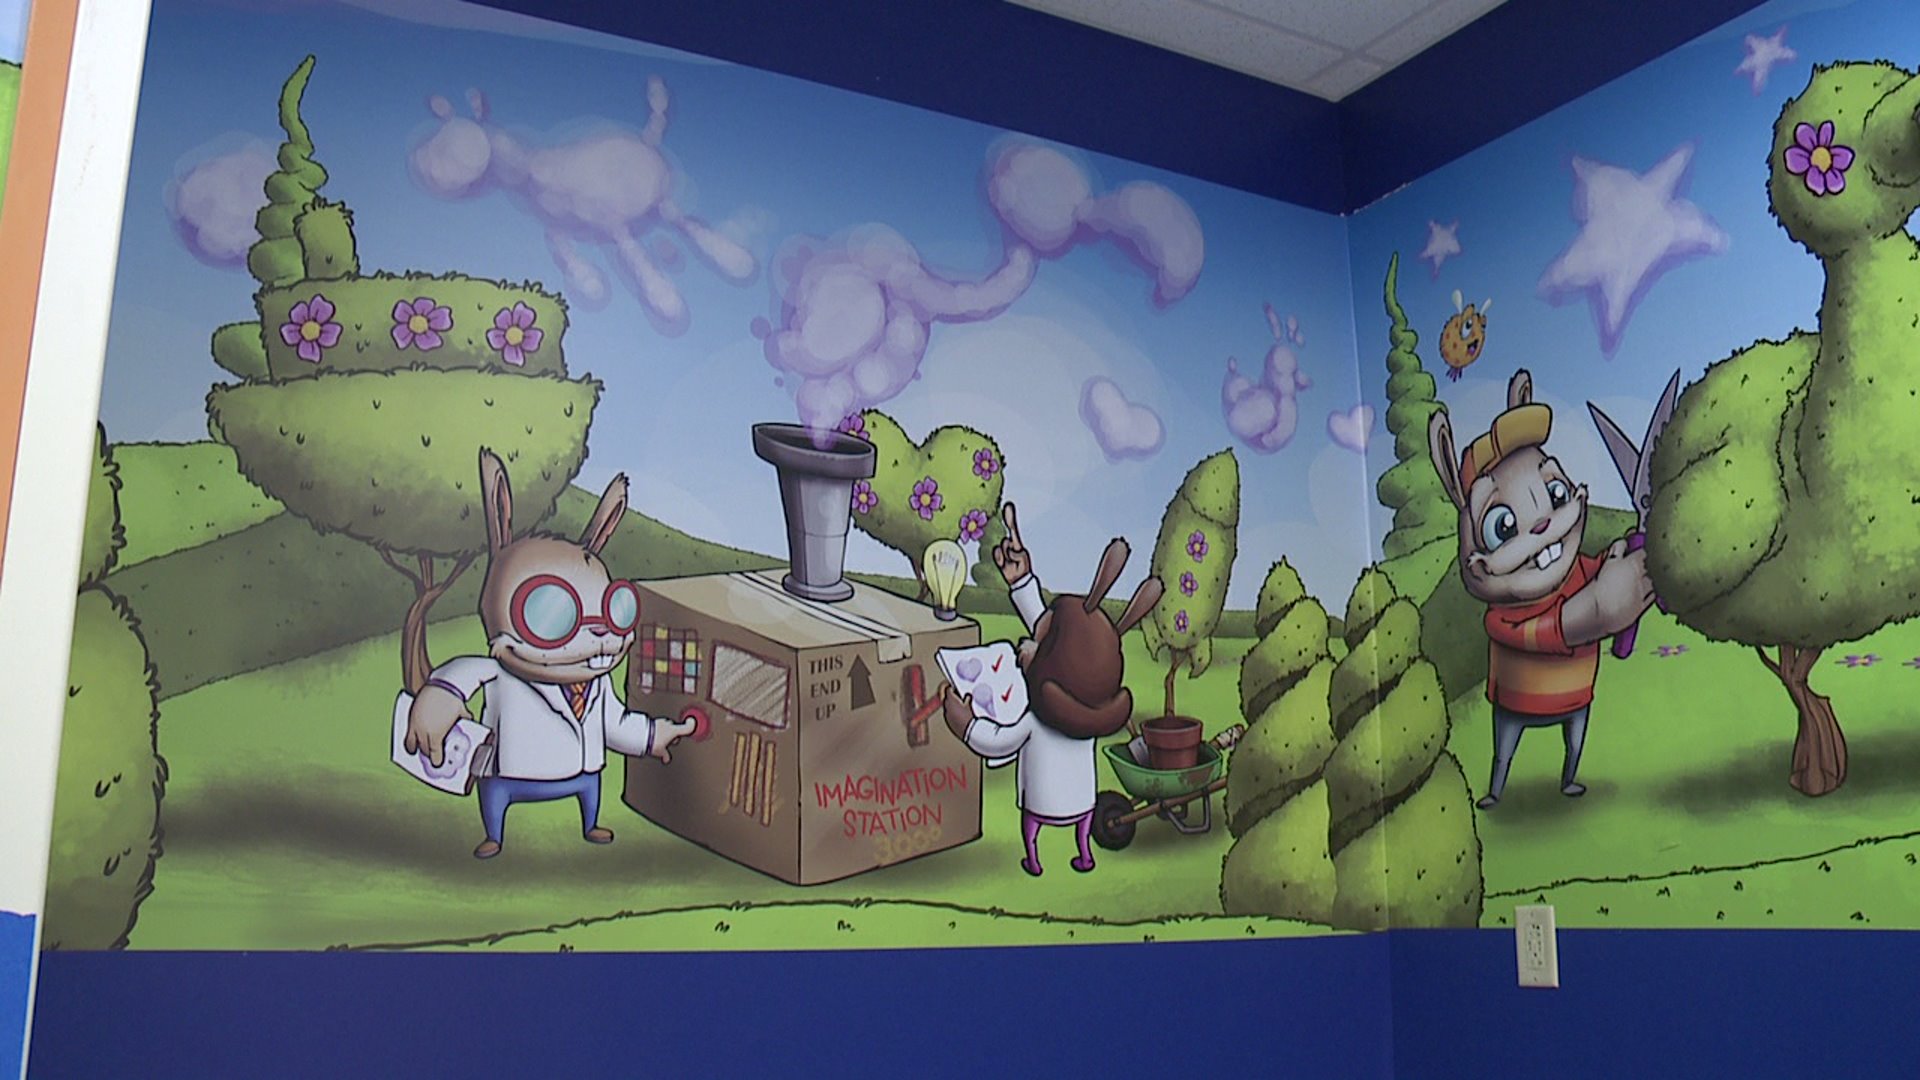 New Children's Mercy Hospital mural in the radiology waiting room. By artist: Scribe